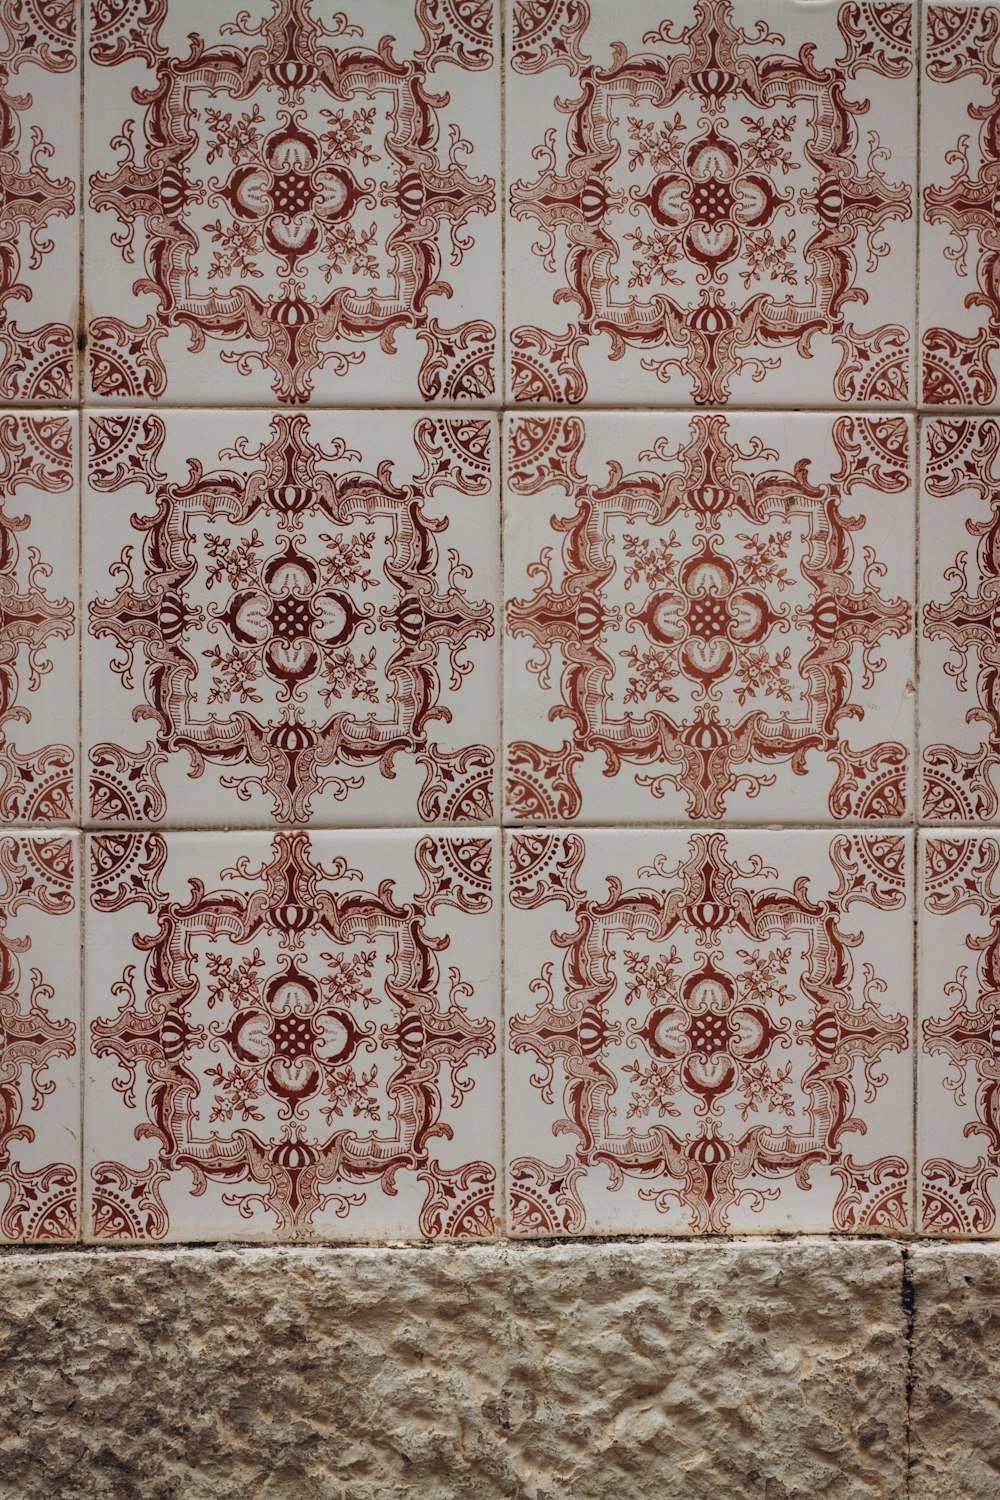 a red and white tiled wall with a clock on it